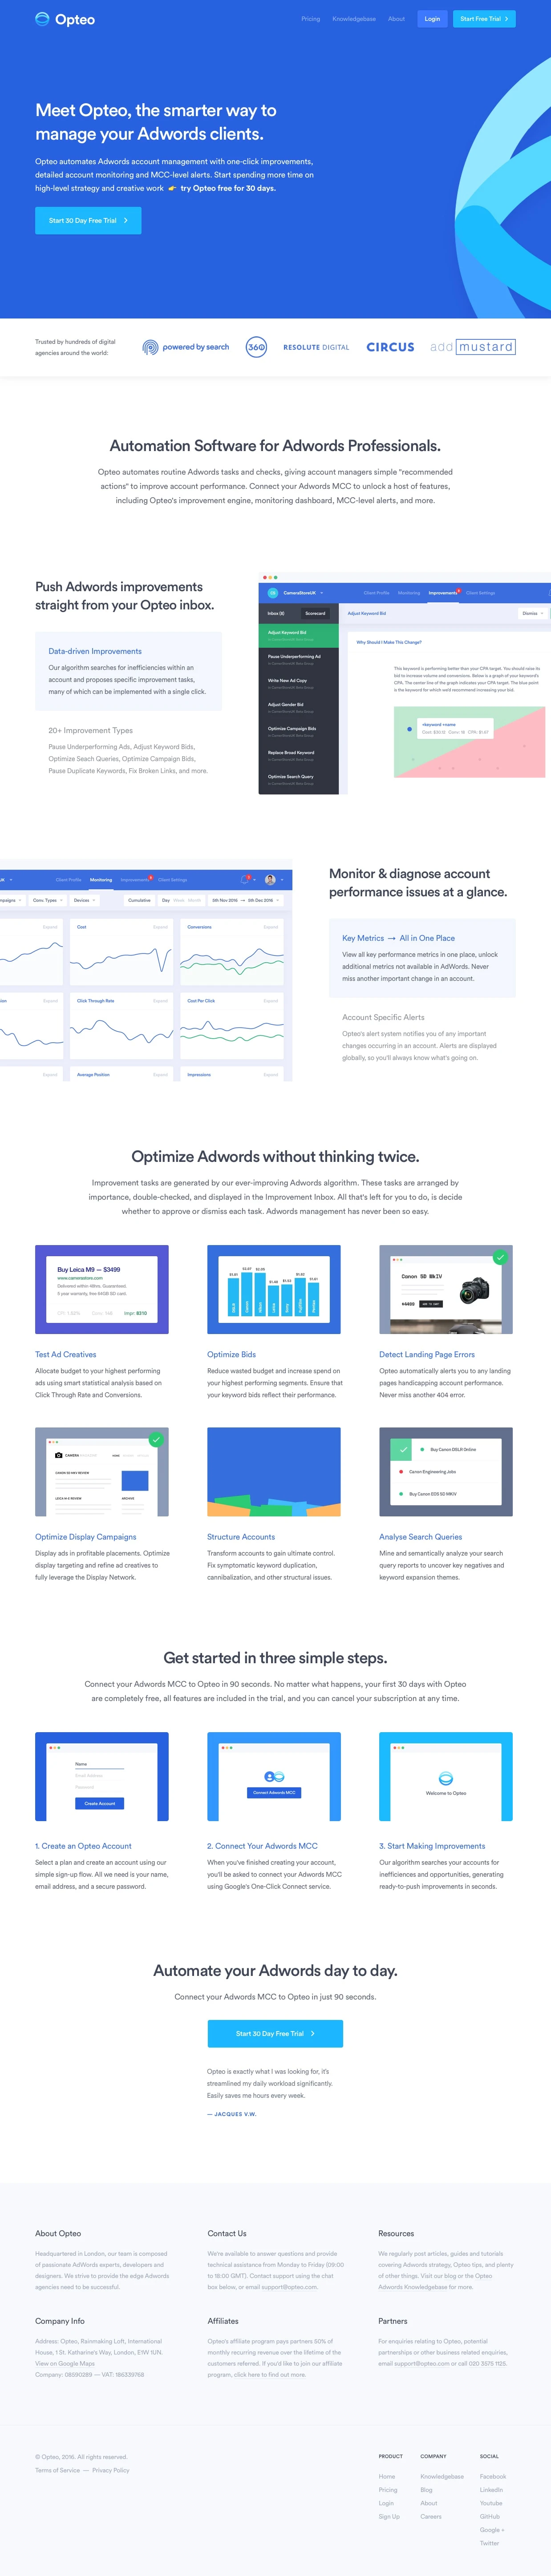 Opteo Landing Page Example: The smarter way to manage your Adwords clients